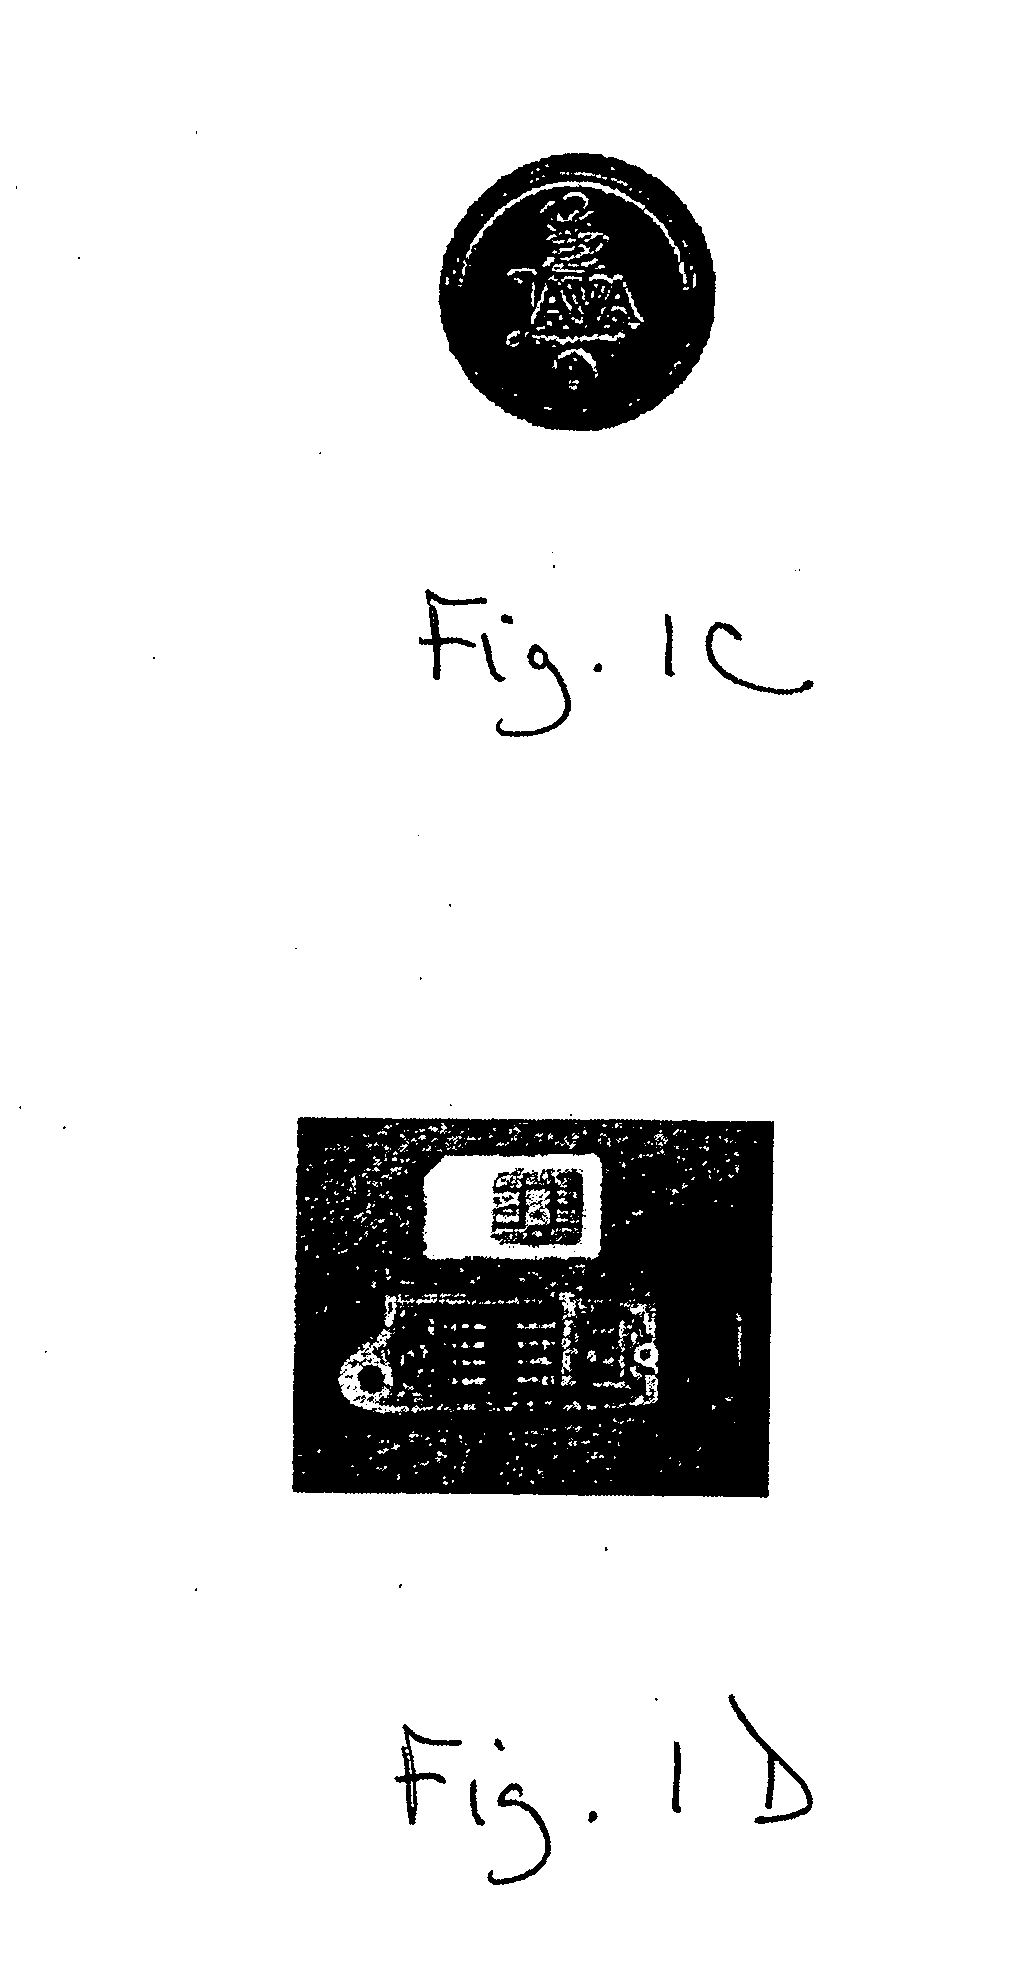 Framework for providing a configurable firewall for computing systems